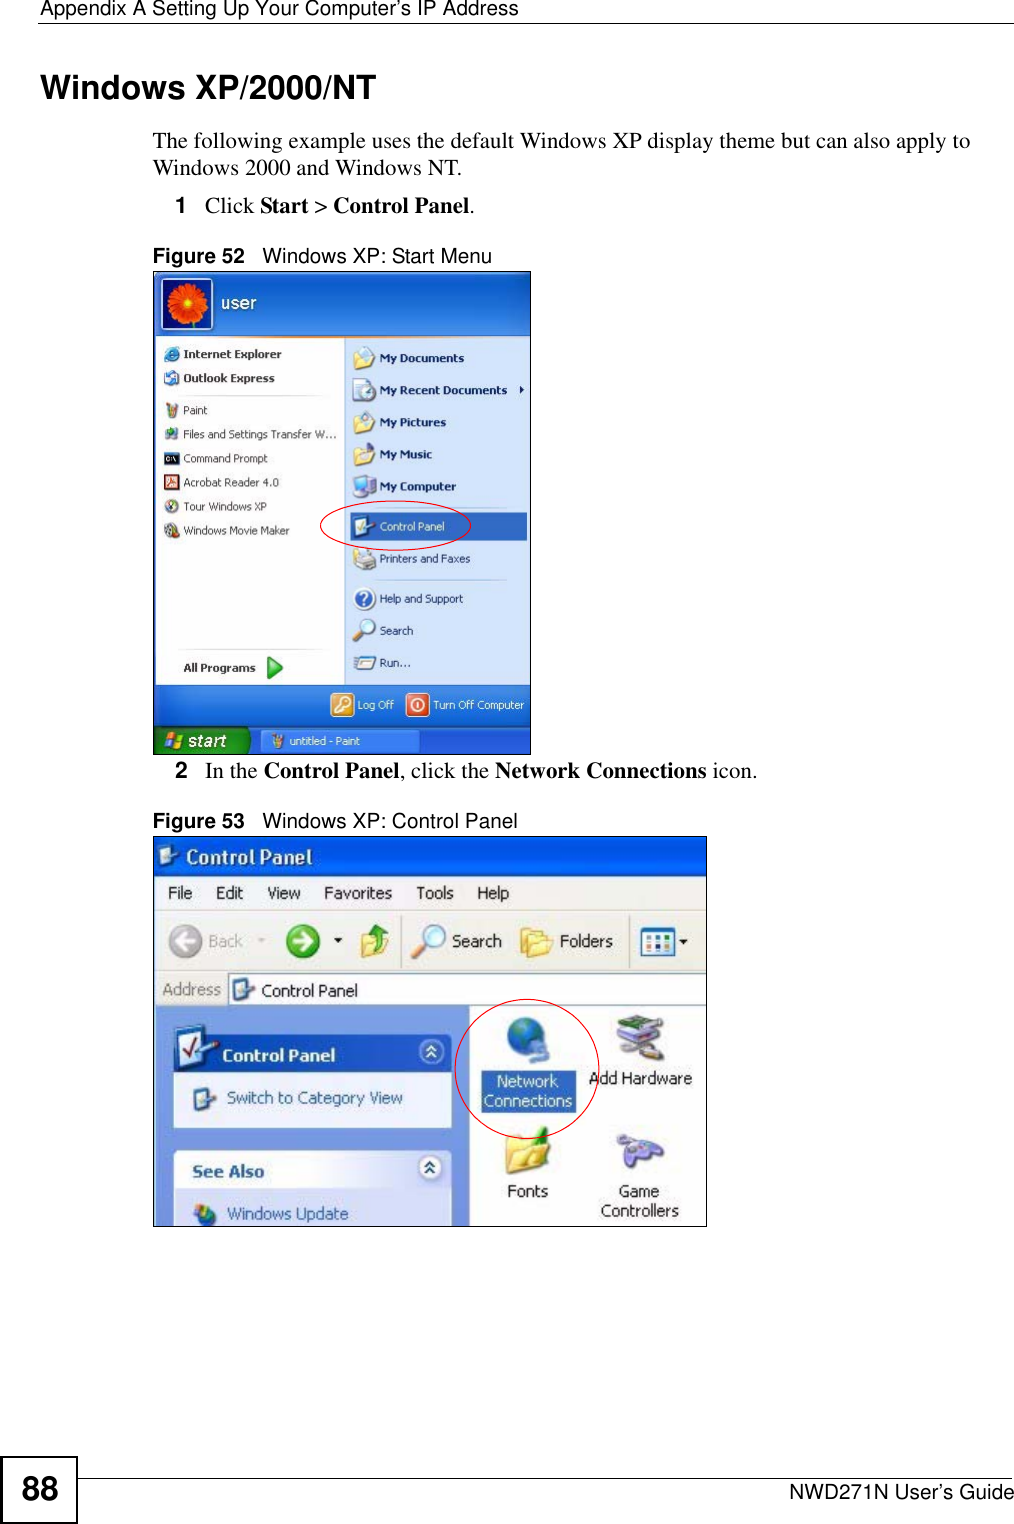 Appendix A Setting Up Your Computer’s IP AddressNWD271N User’s Guide88Windows XP/2000/NTThe following example uses the default Windows XP display theme but can also apply to Windows 2000 and Windows NT.1Click Start &gt; Control Panel.Figure 52   Windows XP: Start Menu2In the Control Panel, click the Network Connections icon.Figure 53   Windows XP: Control Panel